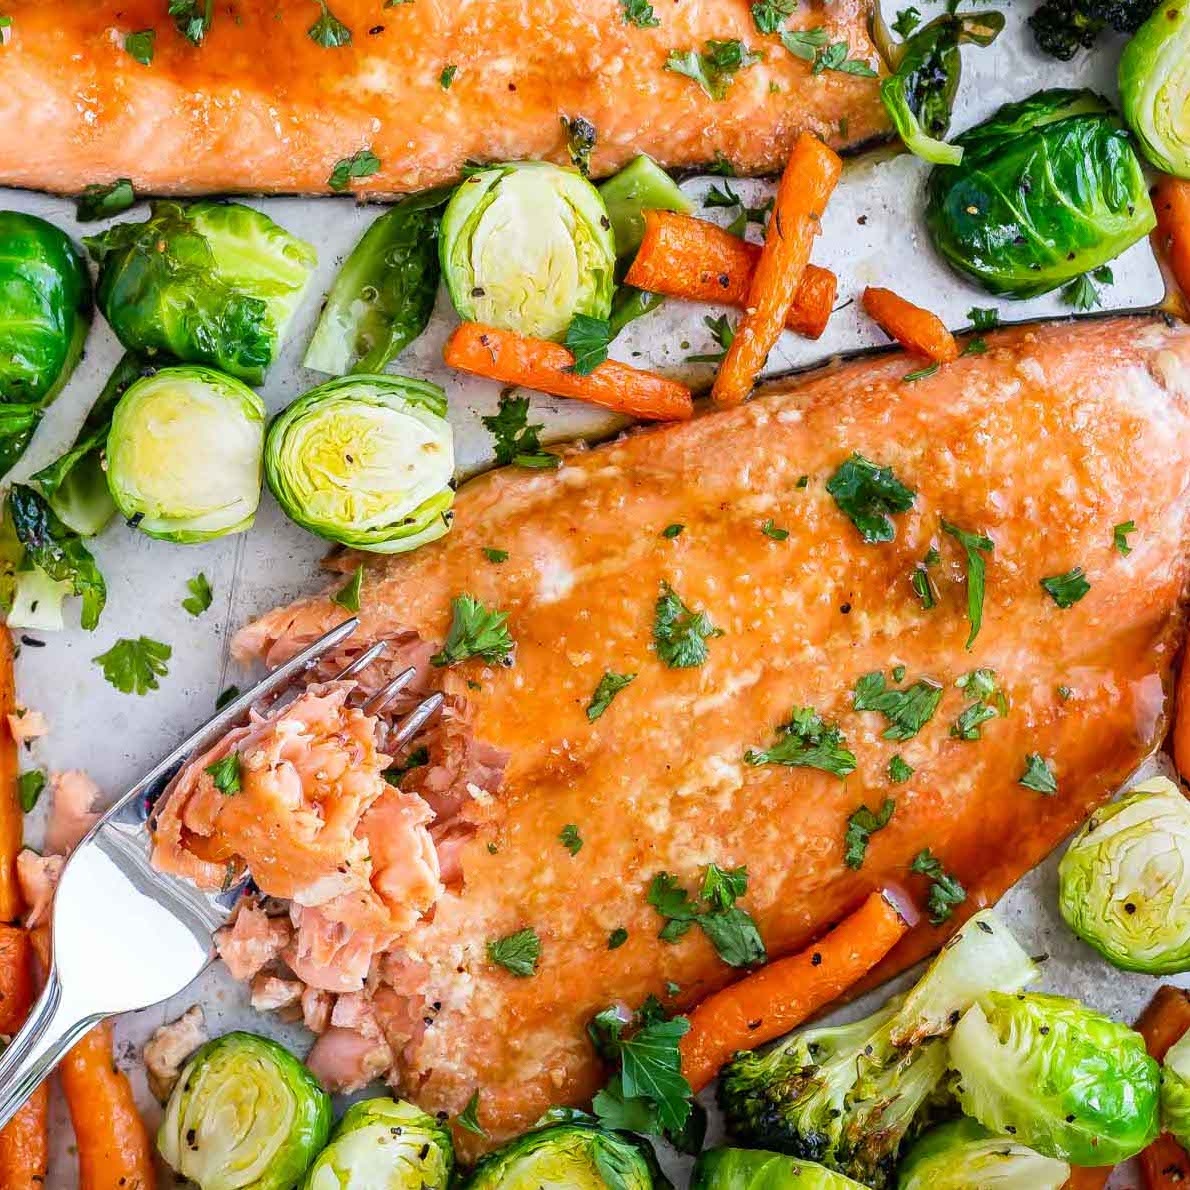 This sheet pan maple glazed salmon and vegetables is an easy, one pan meal that the whole family will love. And the maple glaze has just 3 ingredients! Get the recipe: bake-eat-repeat.com/maple-glazed-s…